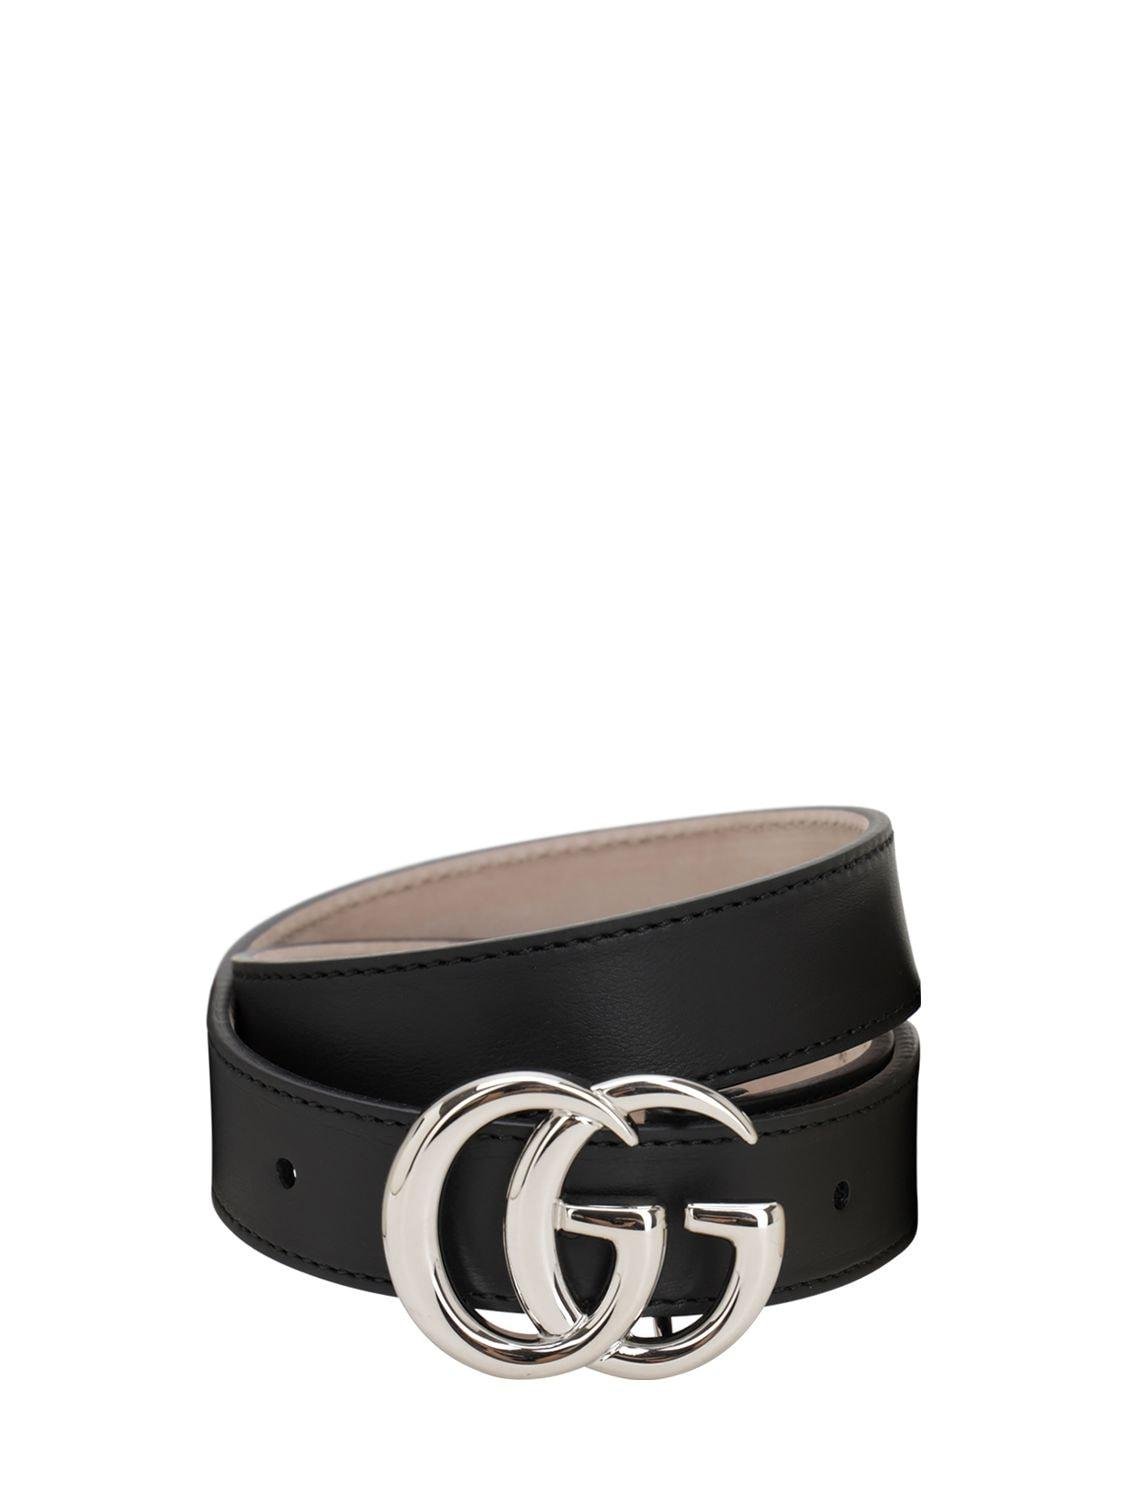 Gg Leather Belt by GUCCI